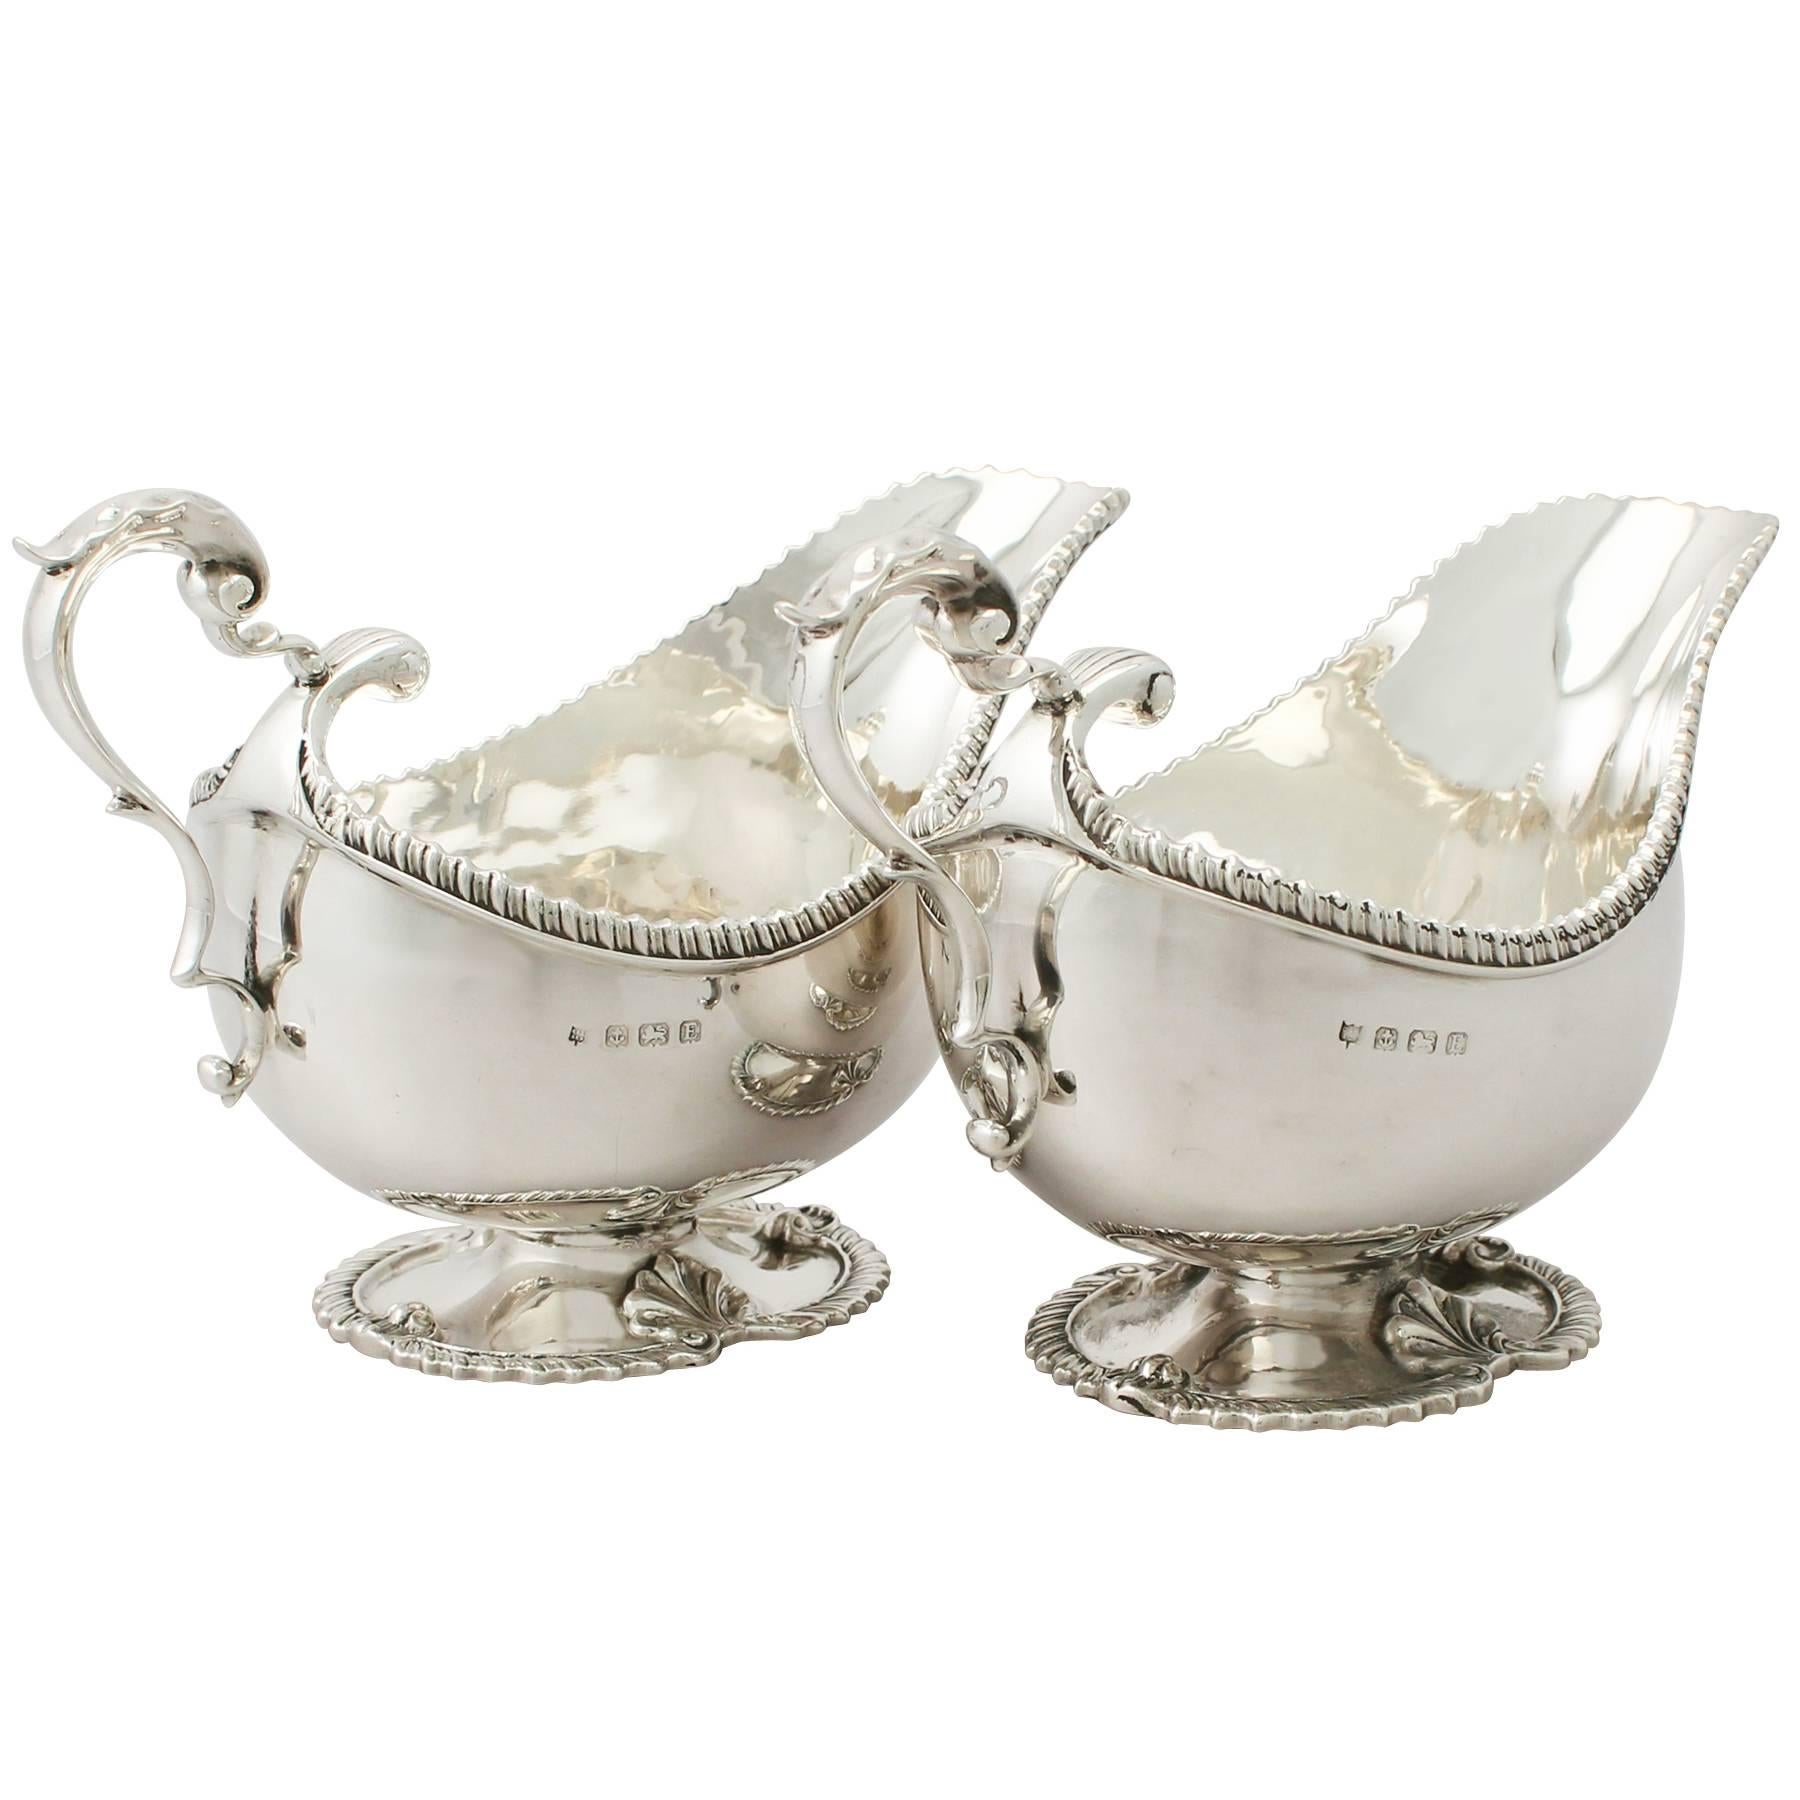 Antique Sterling Silver Sauceboats or Gravy Boats in Regency Style, George V